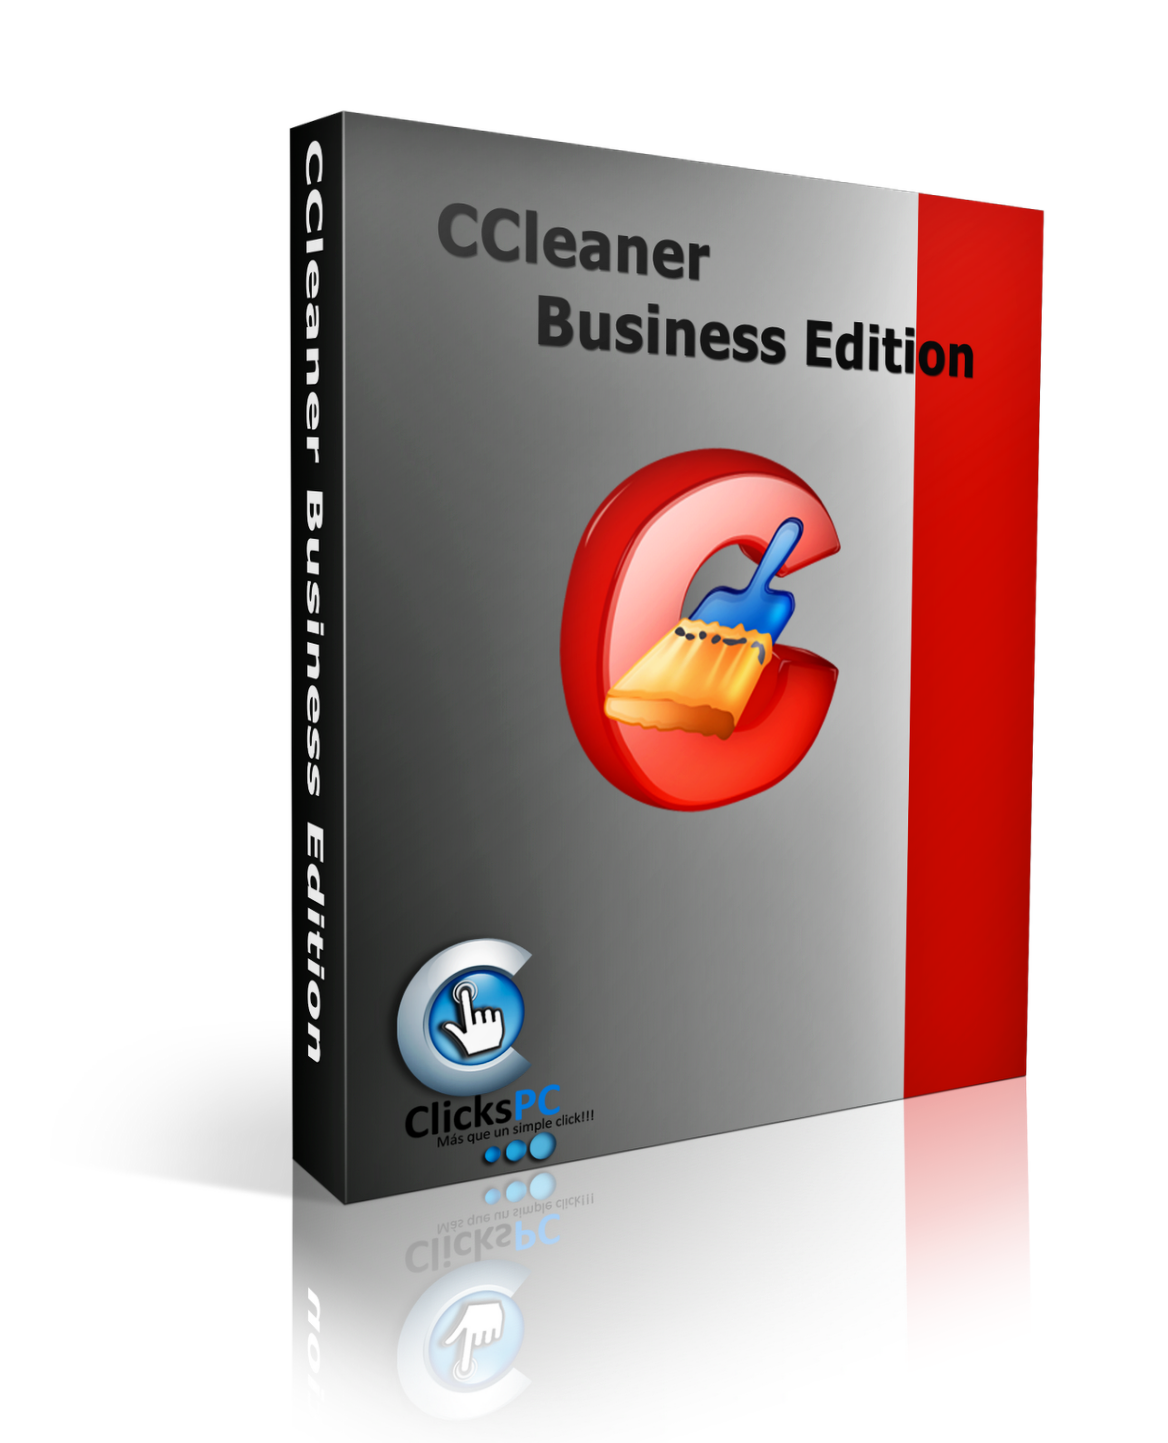 ccleaner download pc